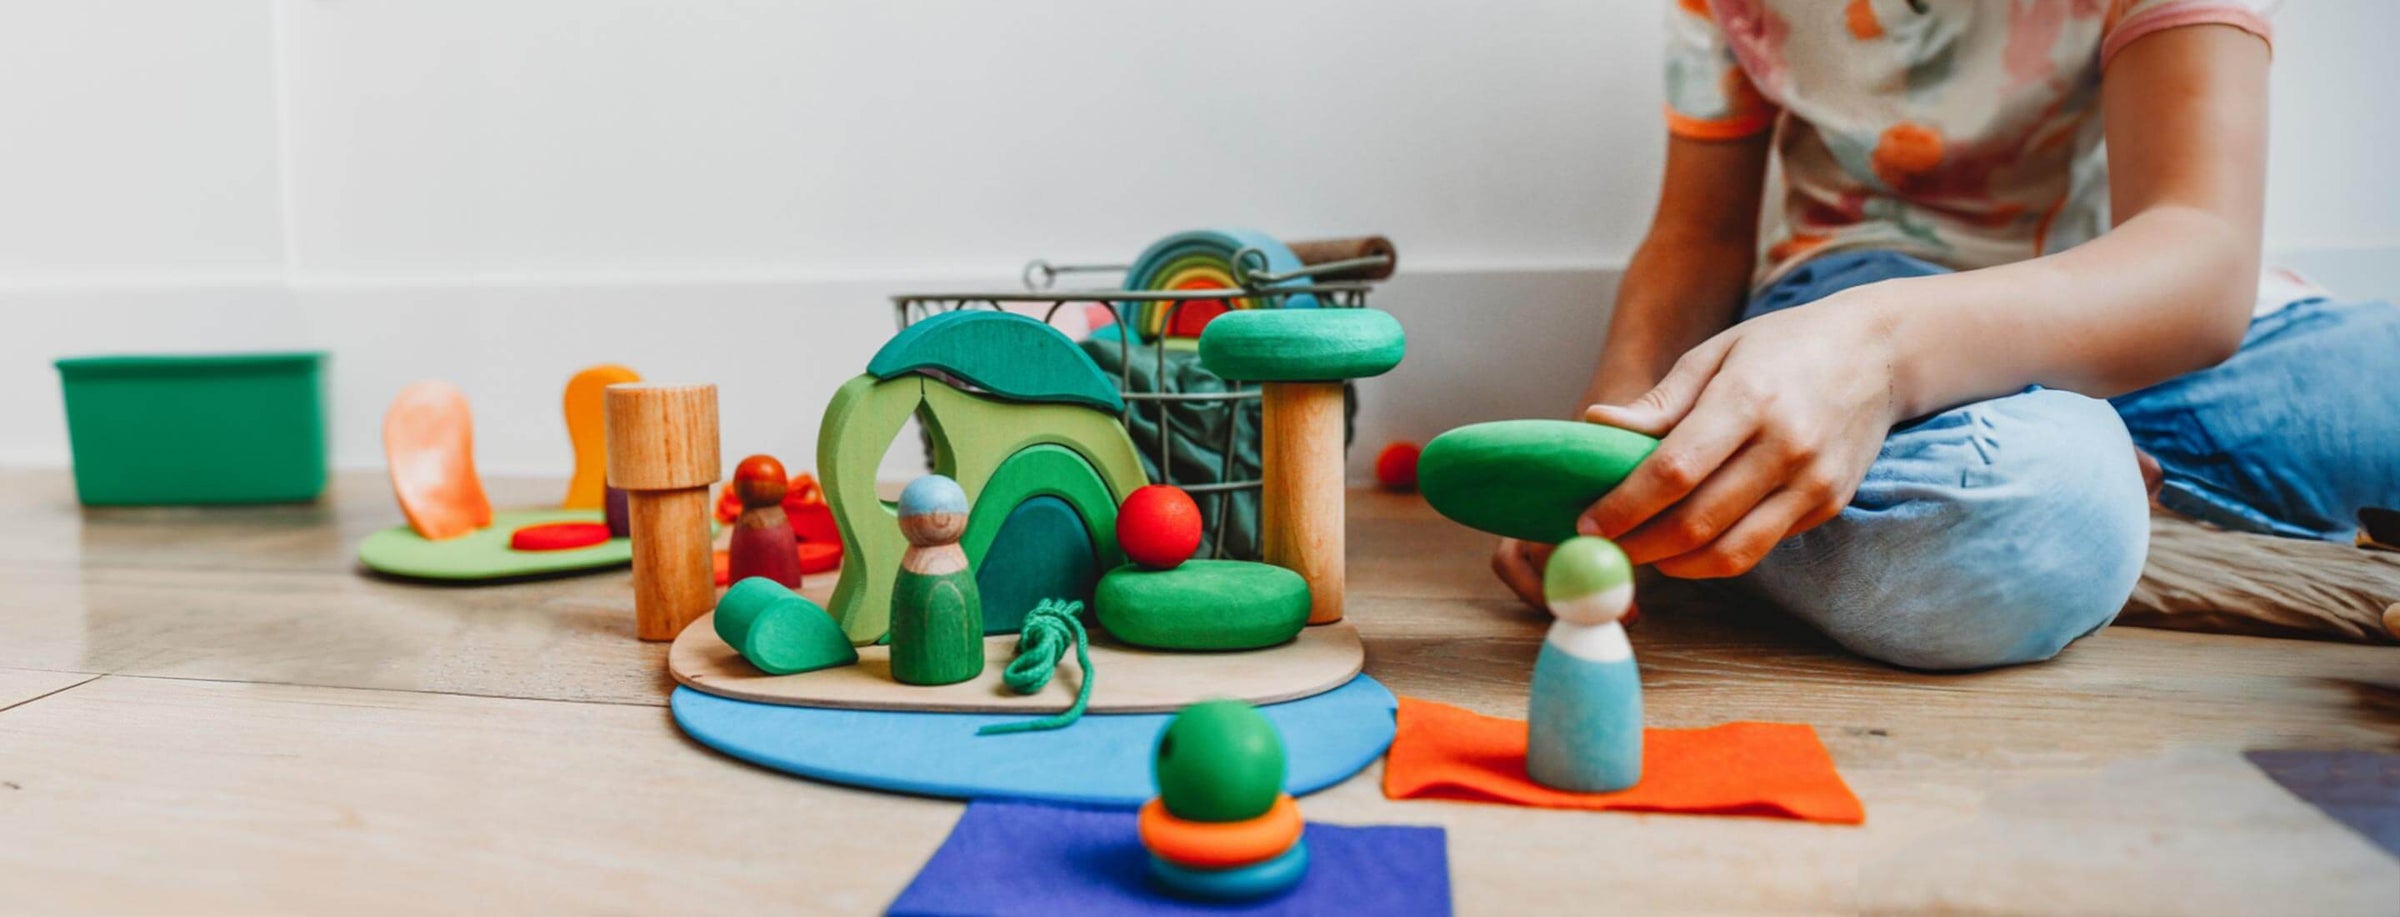 Child playing on wooden floor with green Grimm's wooden toys and peg figures